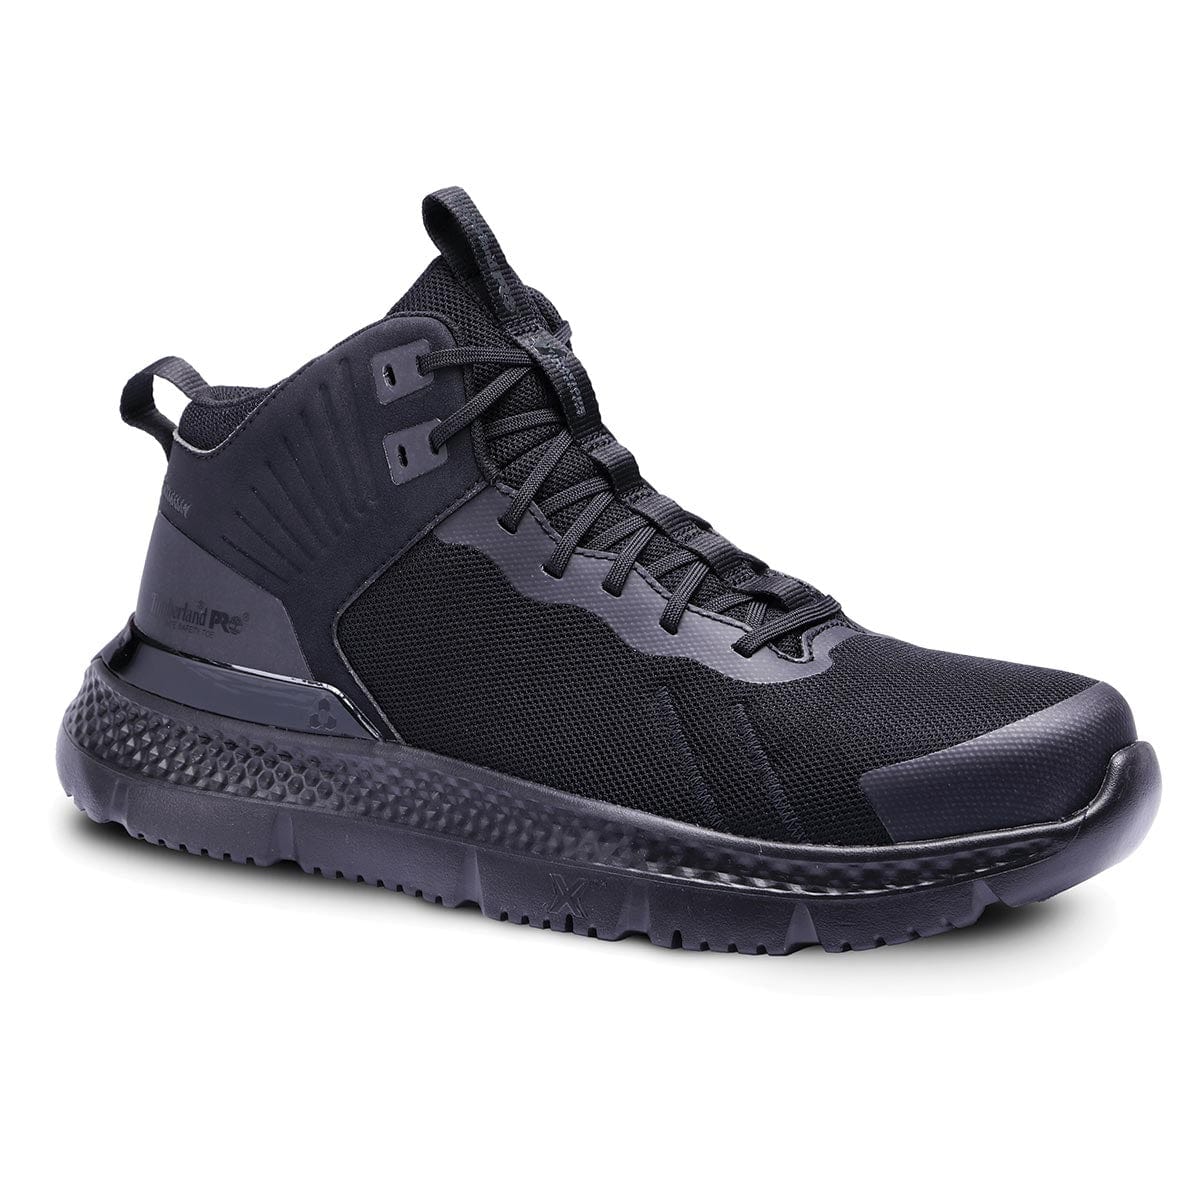 Timberland Pro Setra Composite Toe Mid Boots